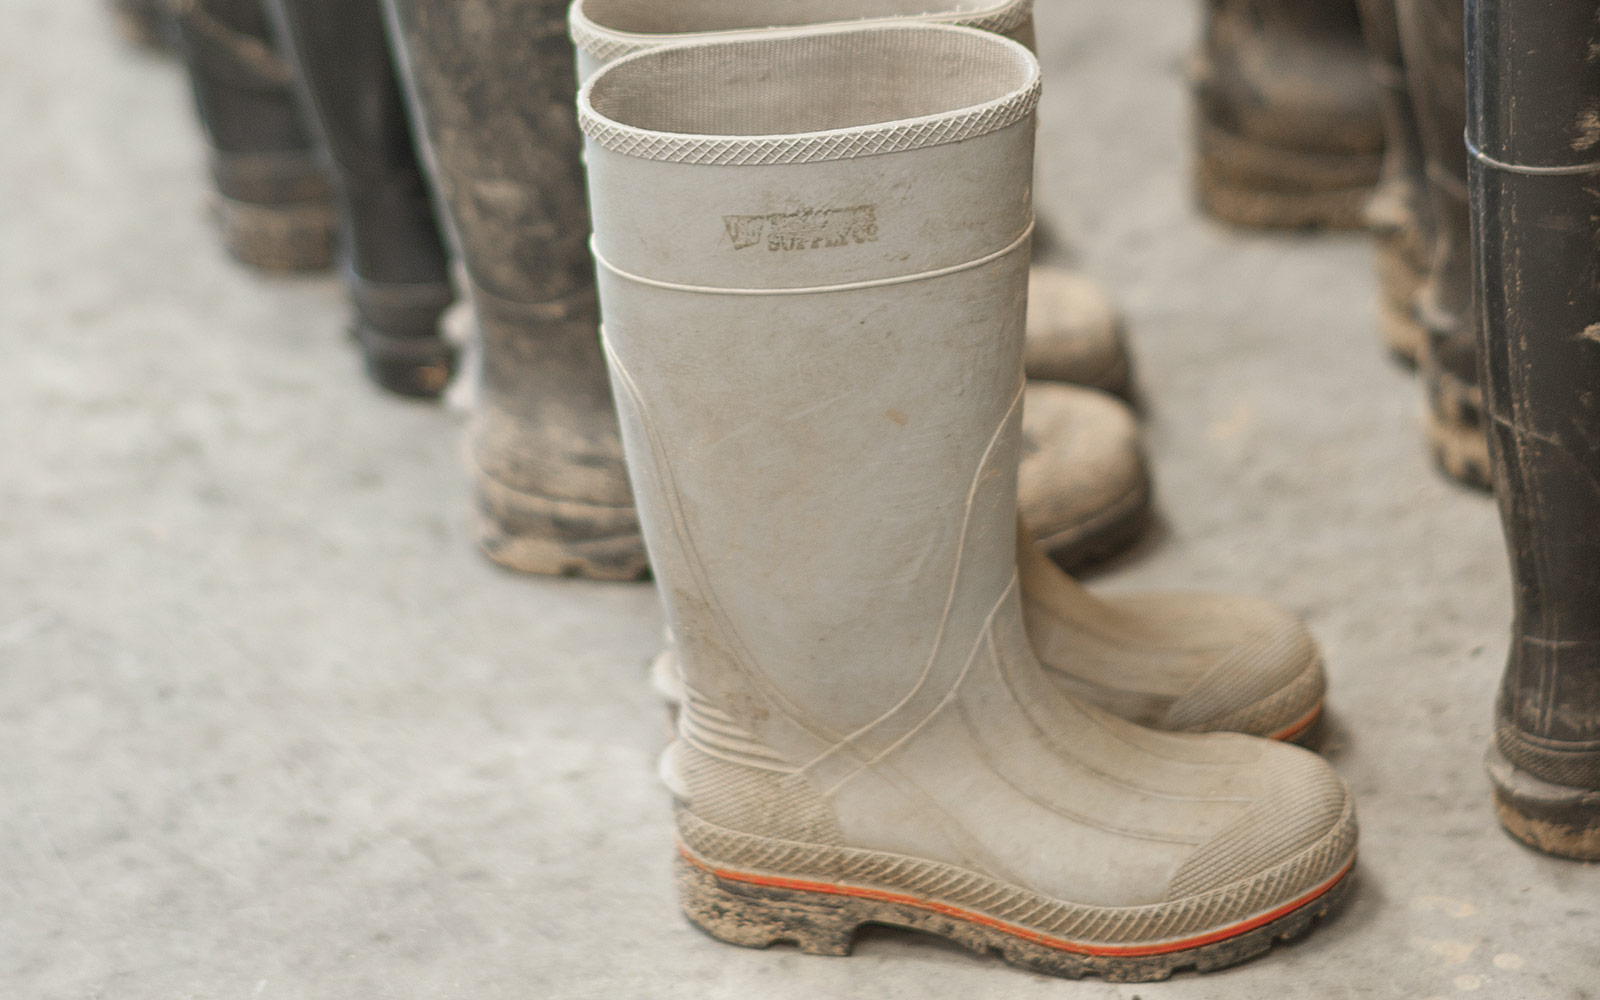 So many schools have a particular thing. For instance, you'll go to a school and everyone is wearing Ugg boots. At Denison, everyone was wearing these rubber boots. They were even wearing them when it wasn't raining.